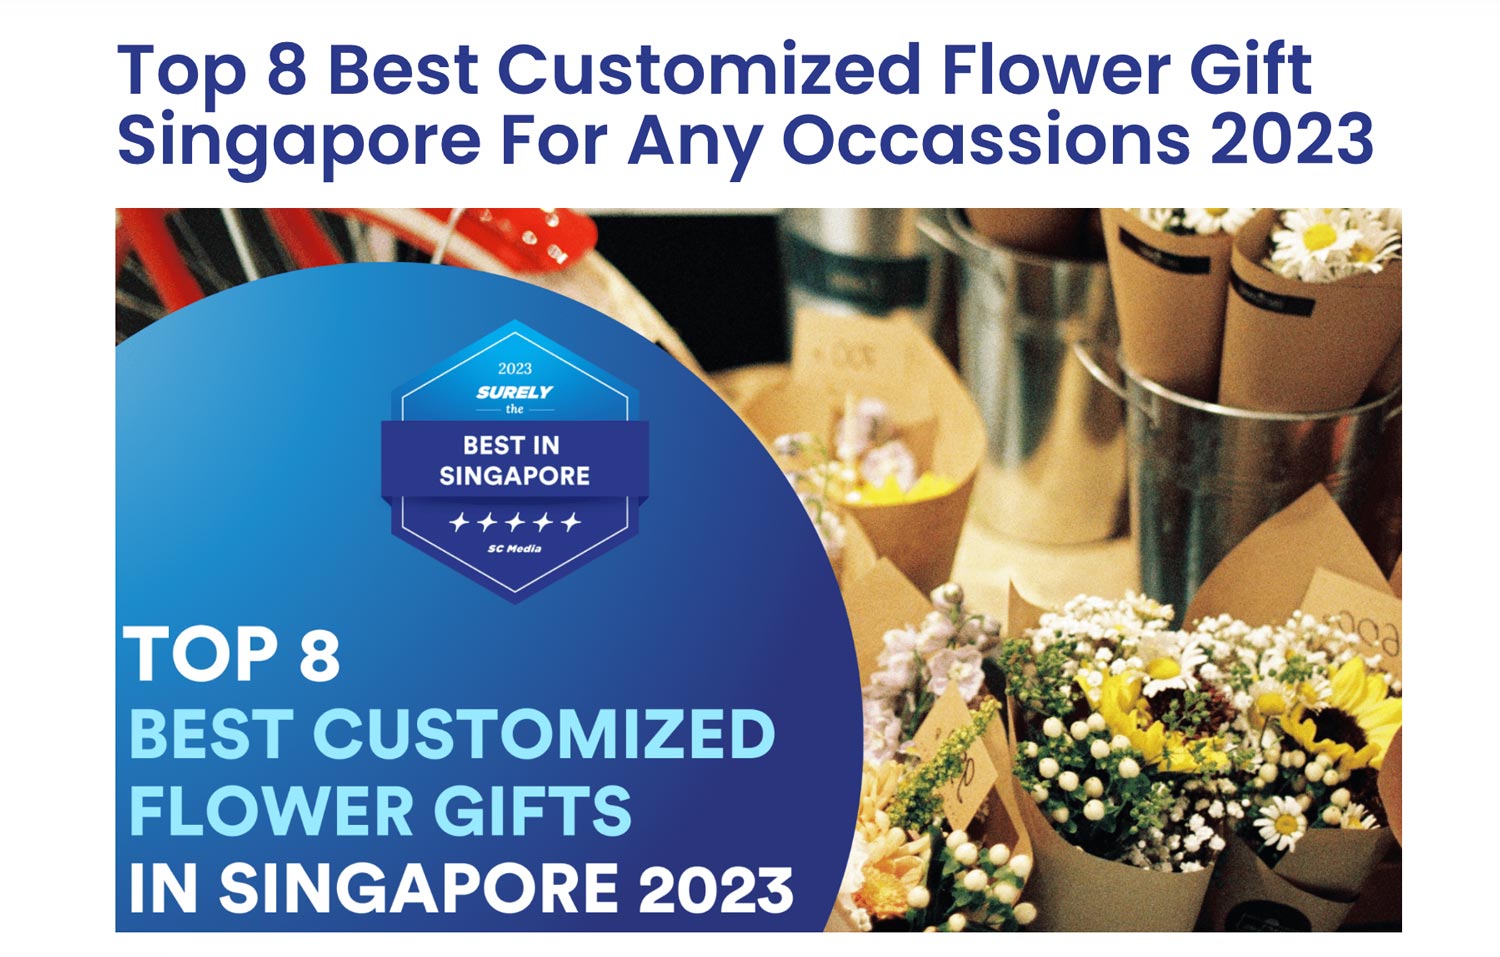 Top 8 Best Customized Flower Gift Singapore For Any Occassions 2023